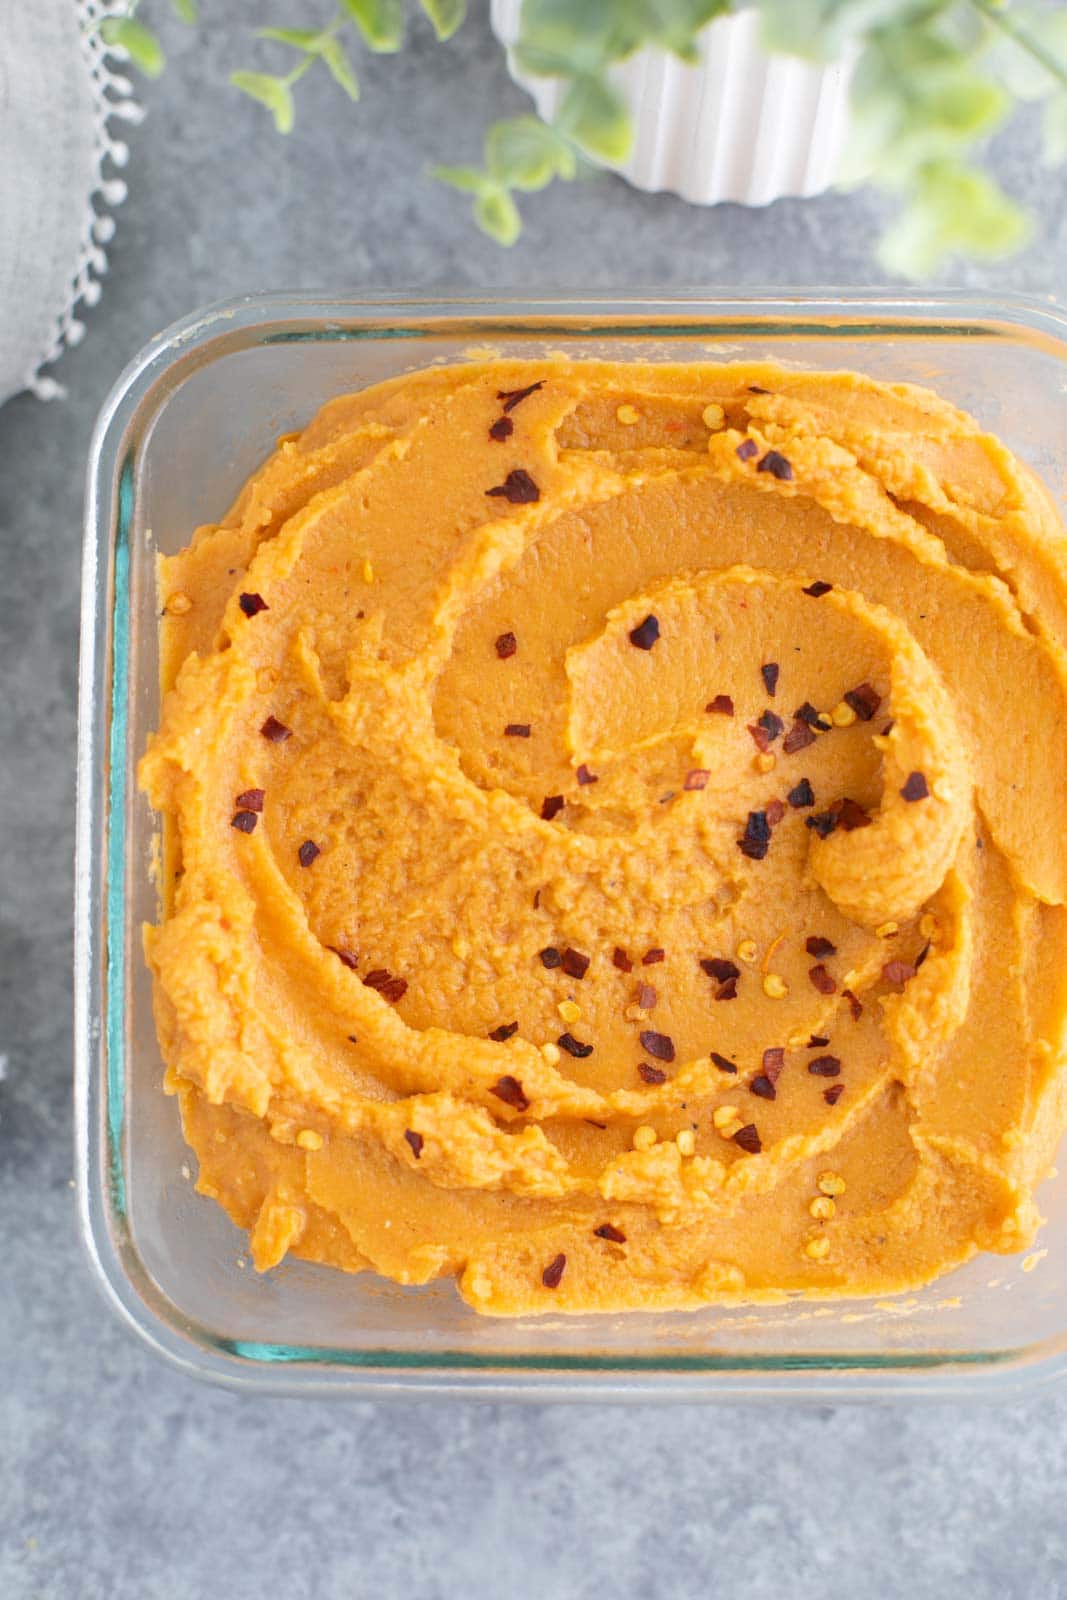 Roasted red pepper hummus in a glass bowl on a gray background.